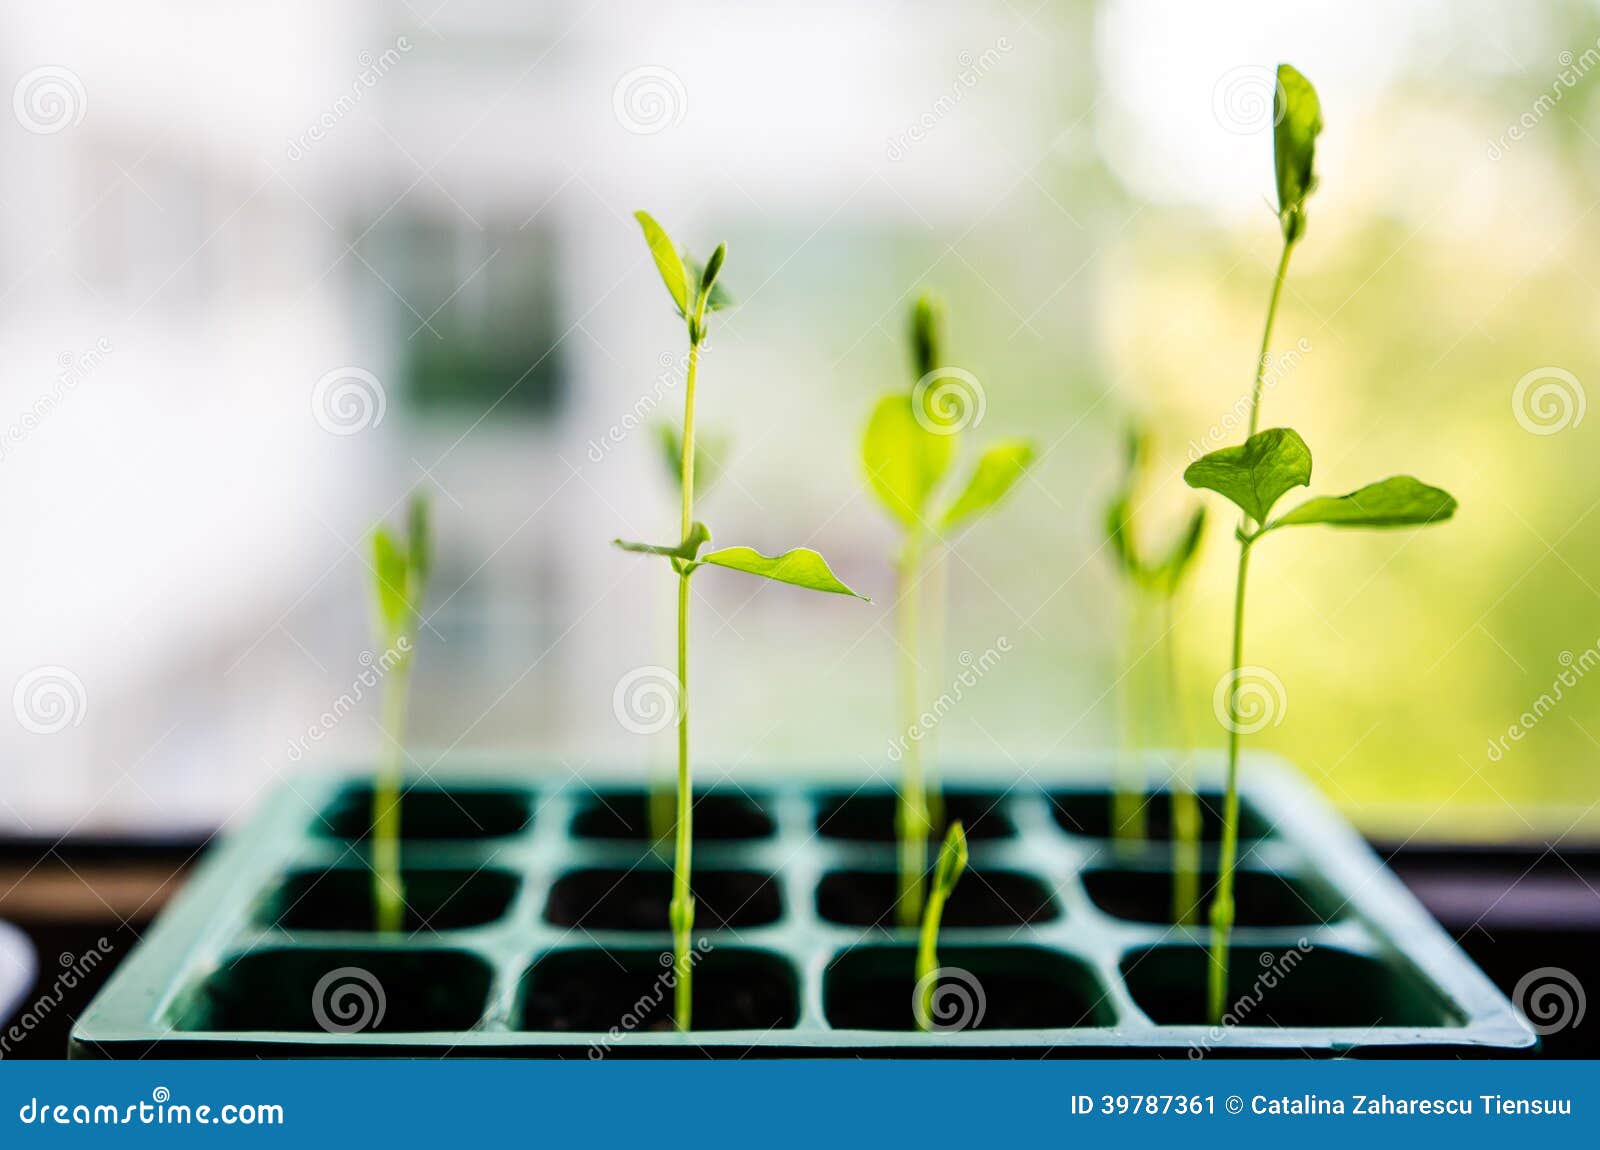 sweet pea sprouts